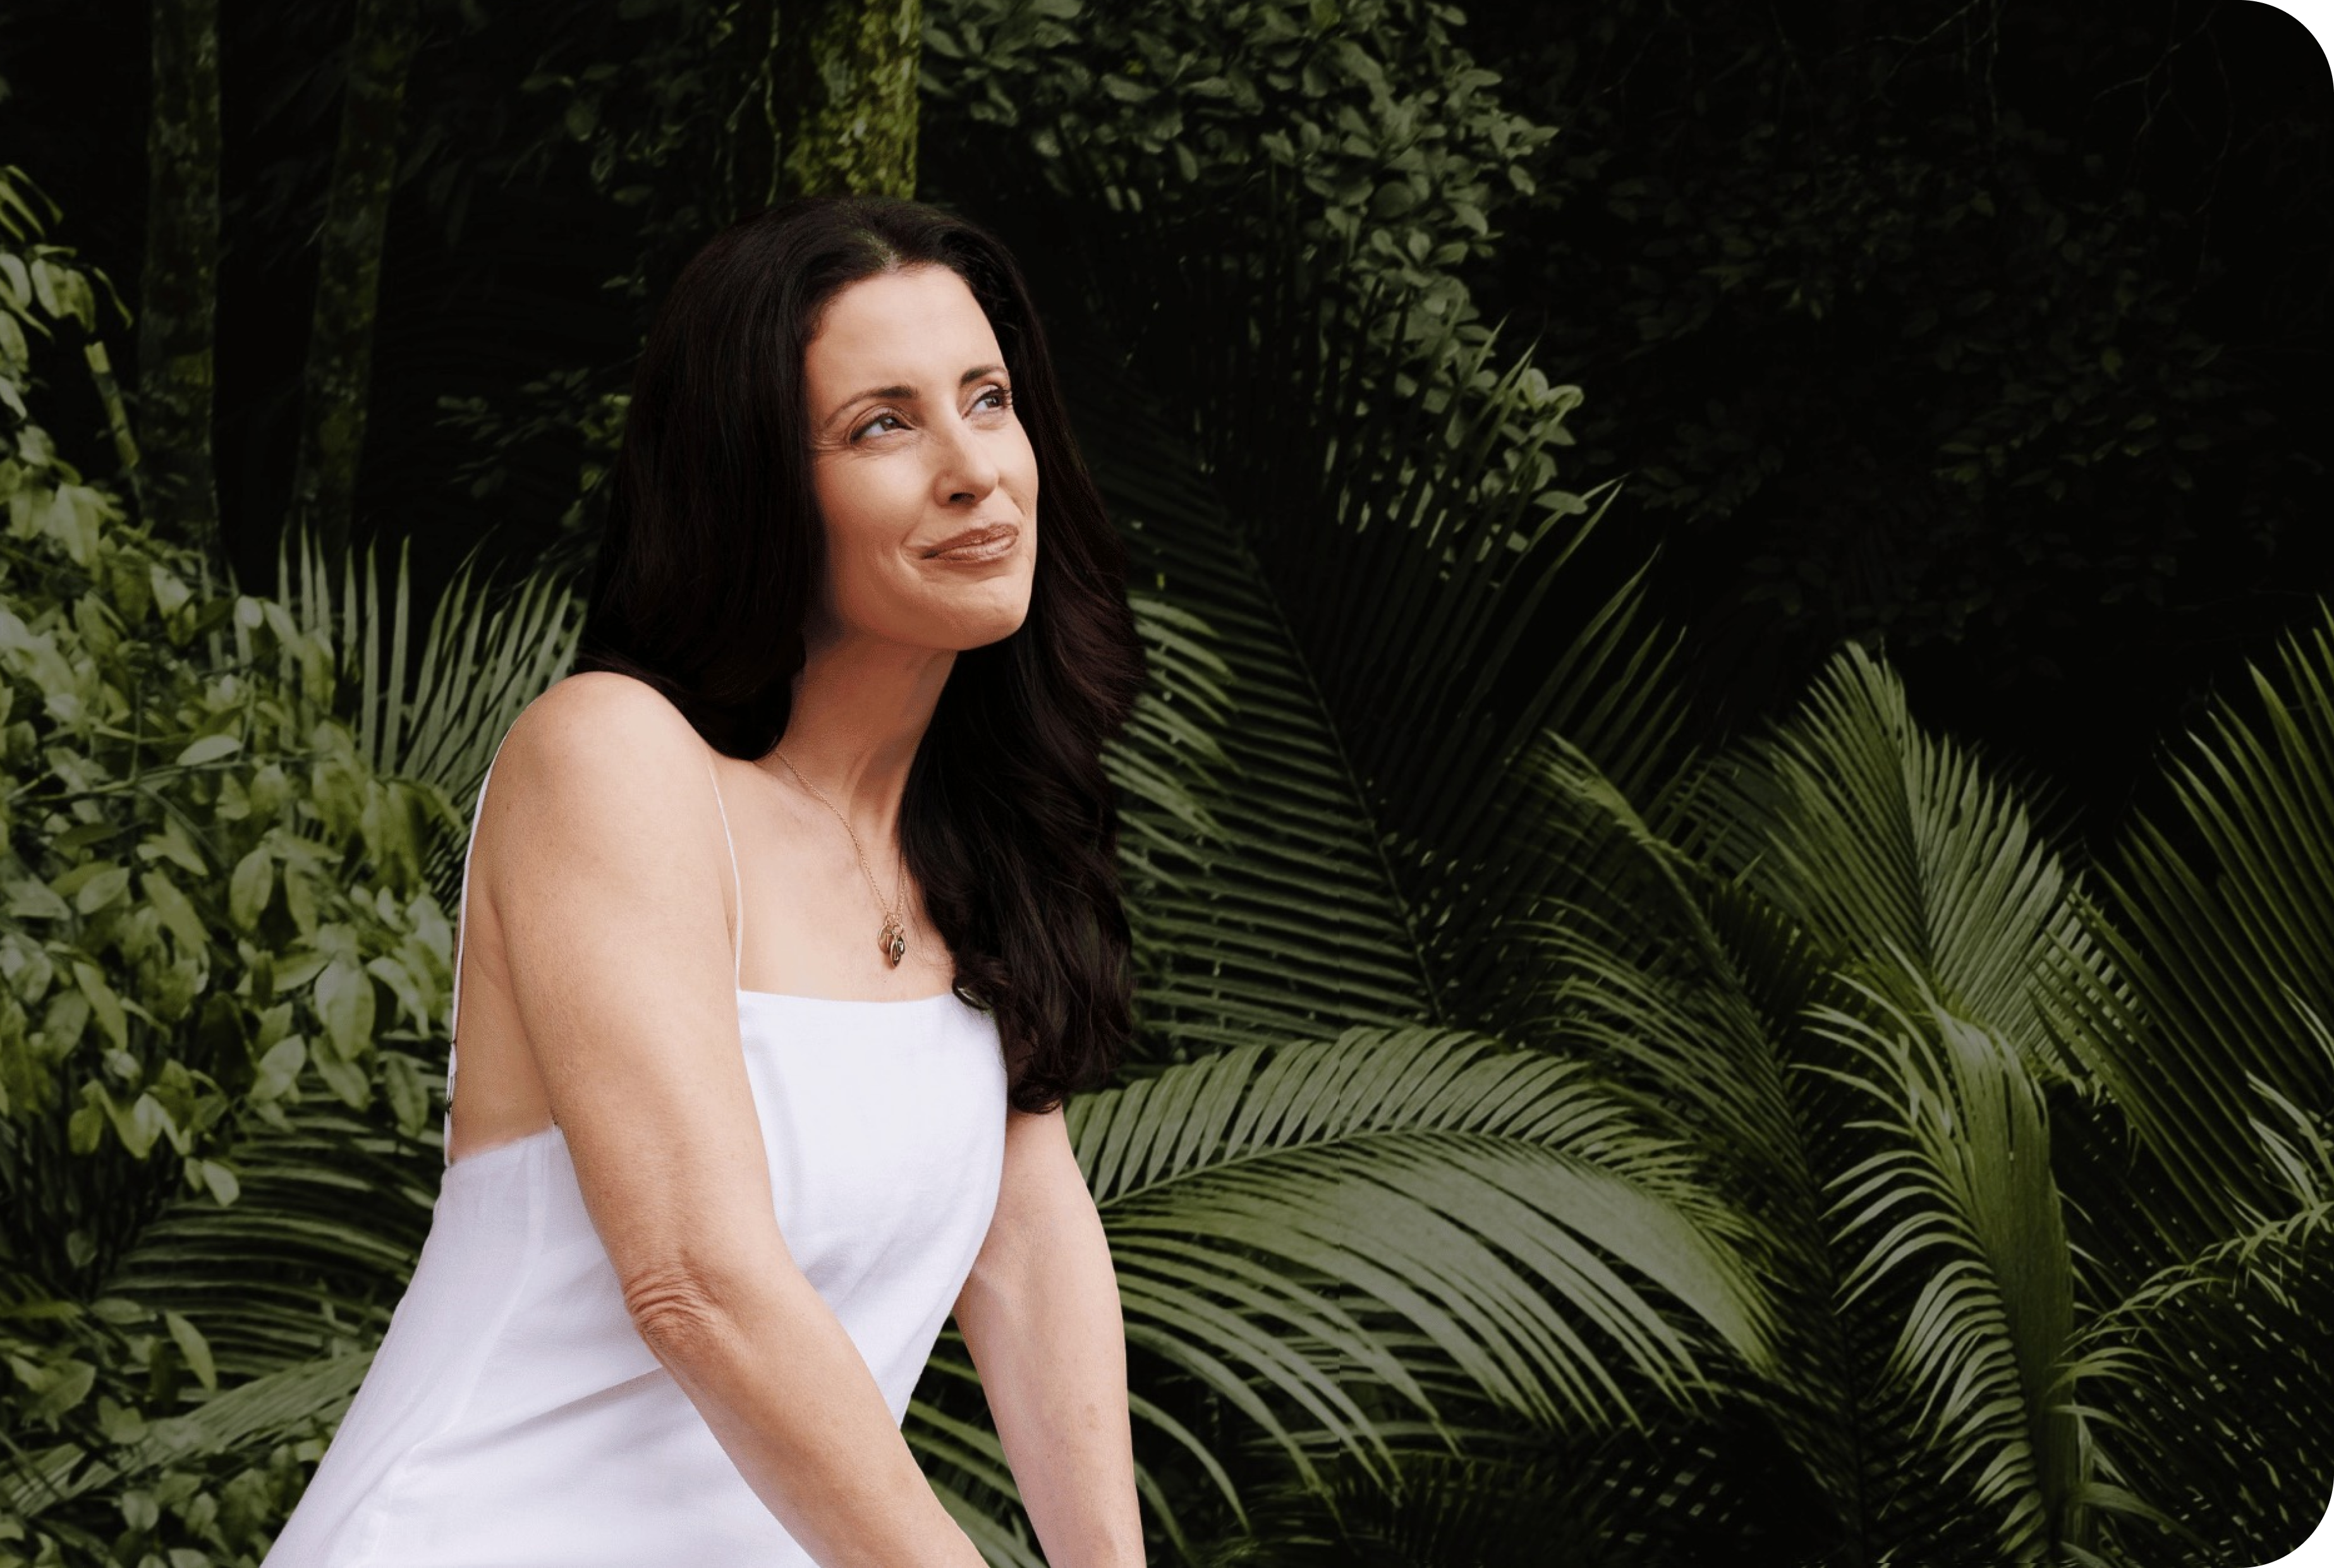 Woman smiling outdoor, tropical foliage background.